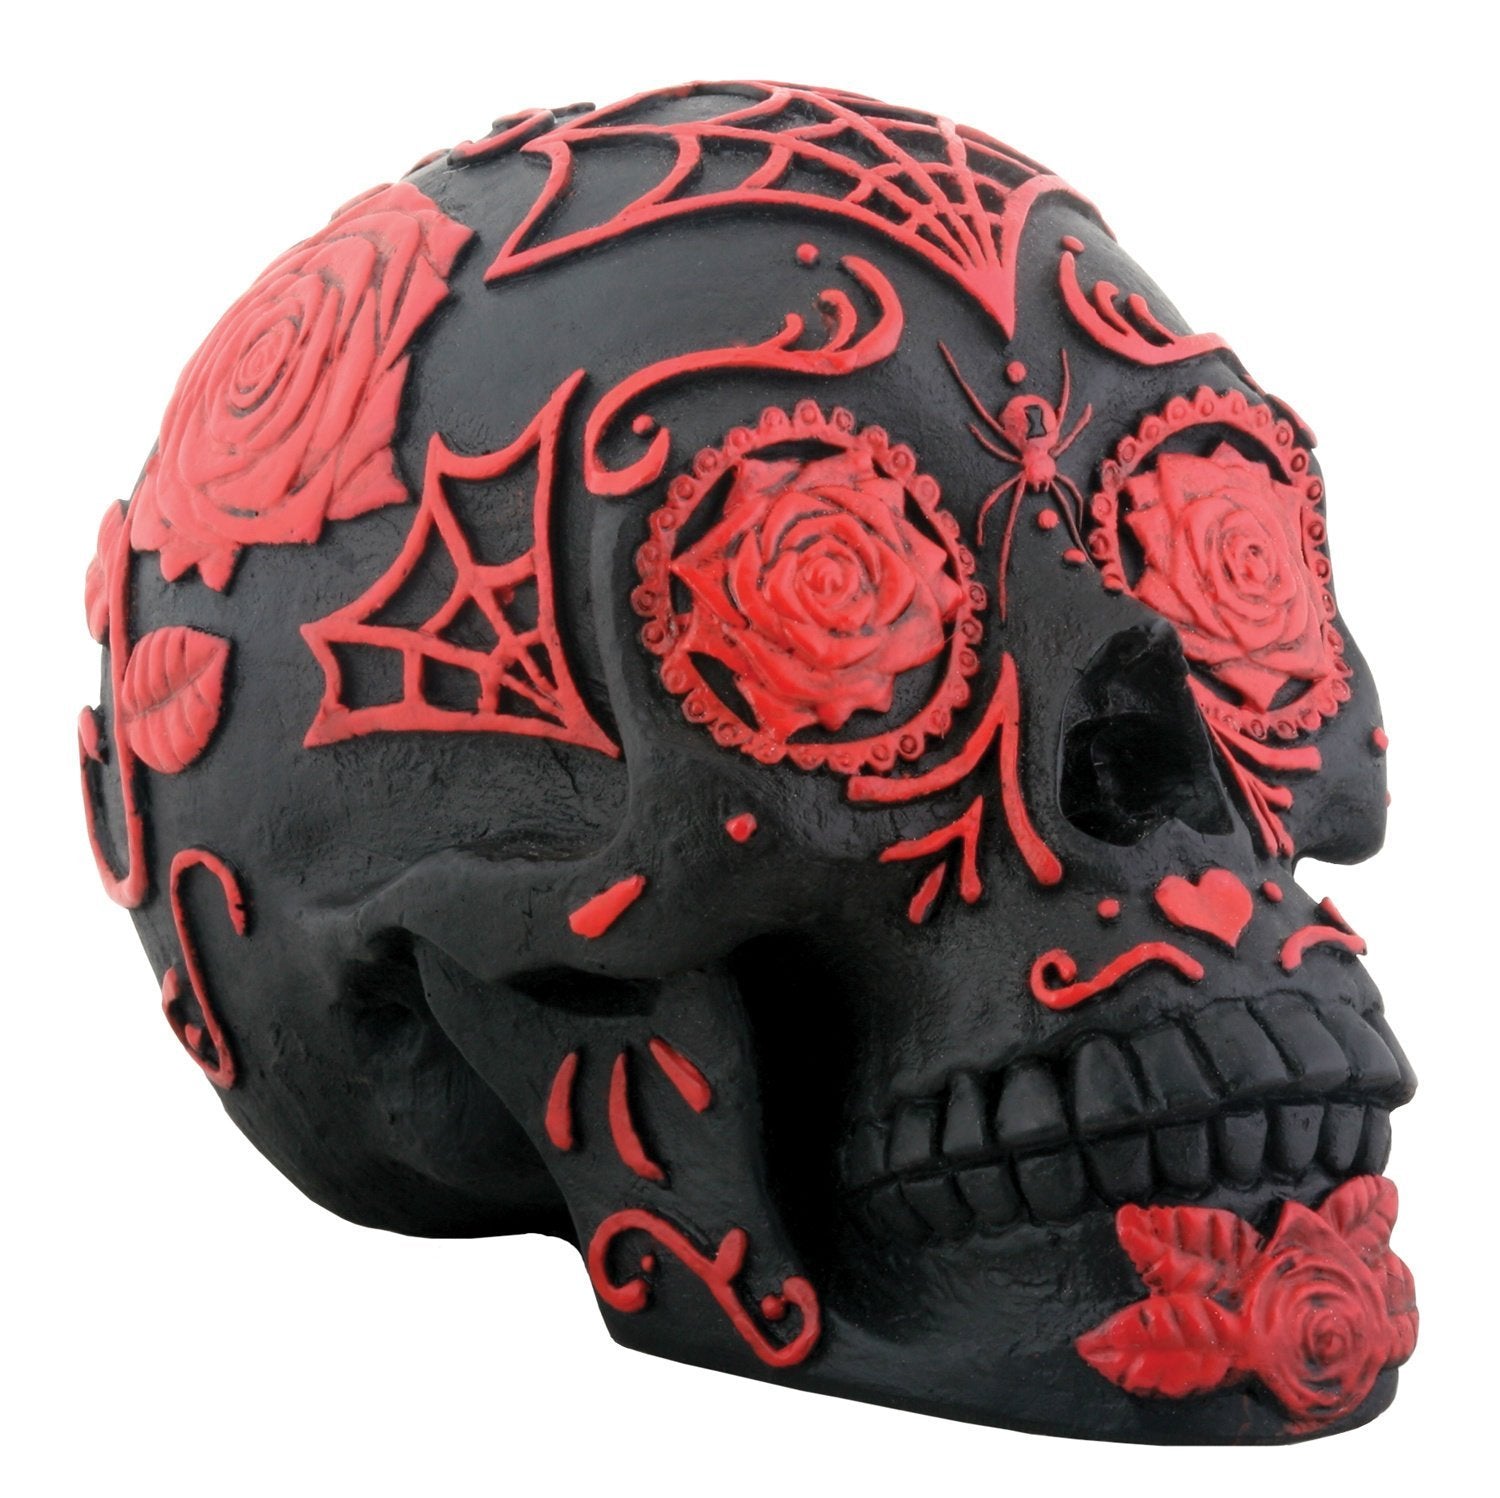 SUMMIT COLLECTION Day of The Dead Black and Red Tattoo Sugar Skull Collectible